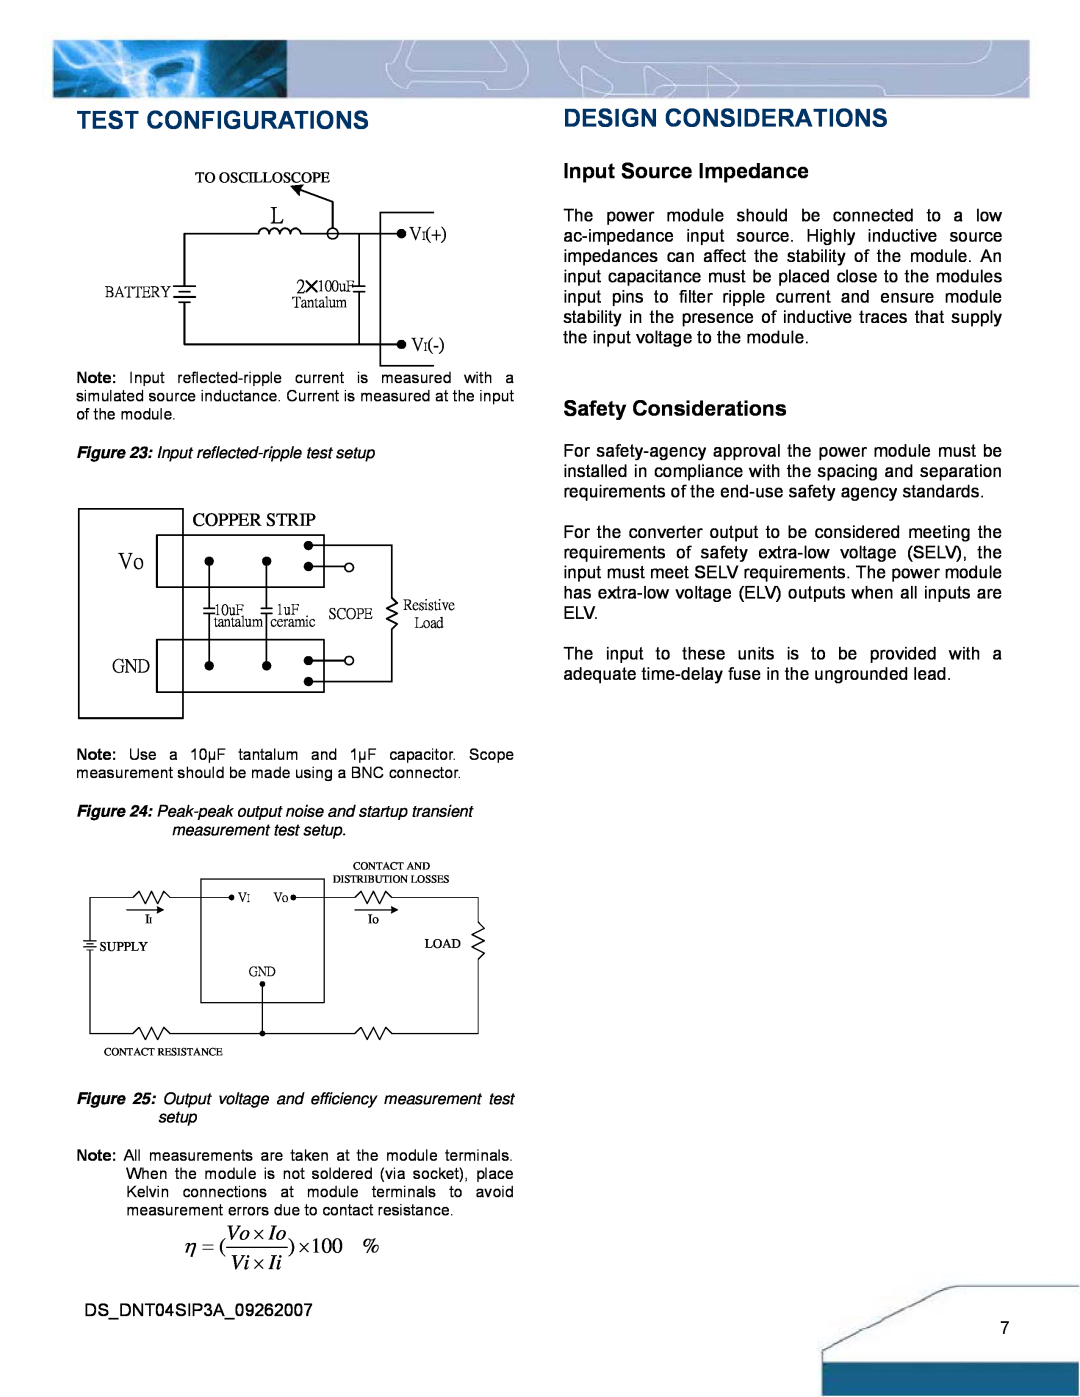 Delta Electronics DNT04 Test Configurations, Design Considerations, Input Source Impedance, Safety Considerations, Vi ⋅ 